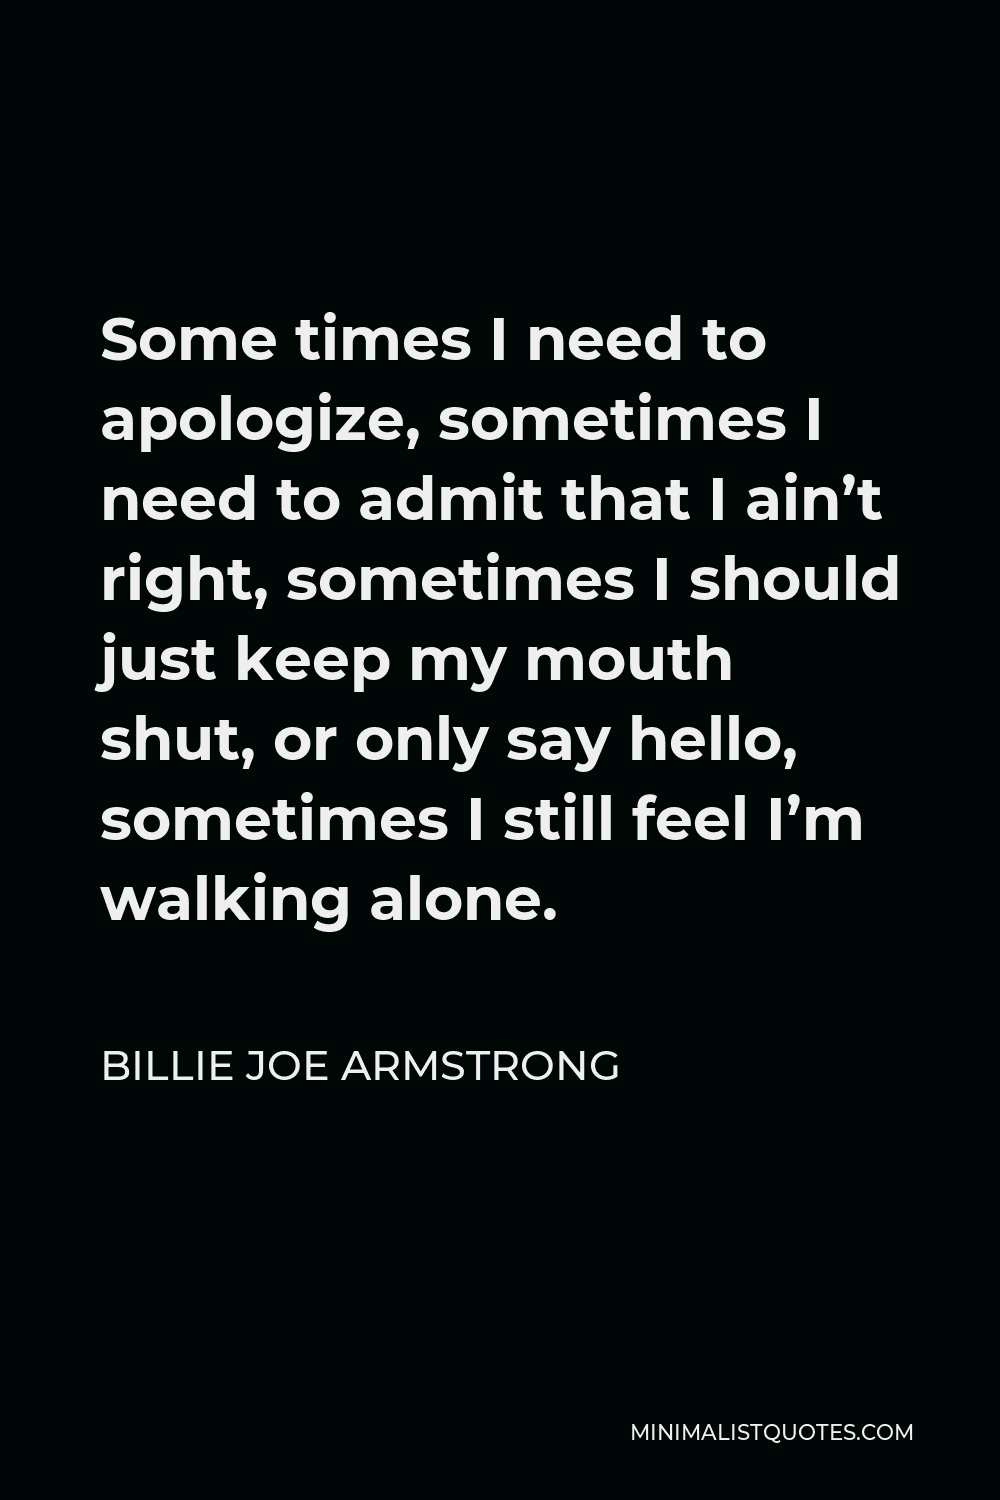 Billie Joe Armstrong Quote - Some times I need to apologize, sometimes I need to admit that I ain’t right, sometimes I should just keep my mouth shut, or only say hello, sometimes I still feel I’m walking alone.